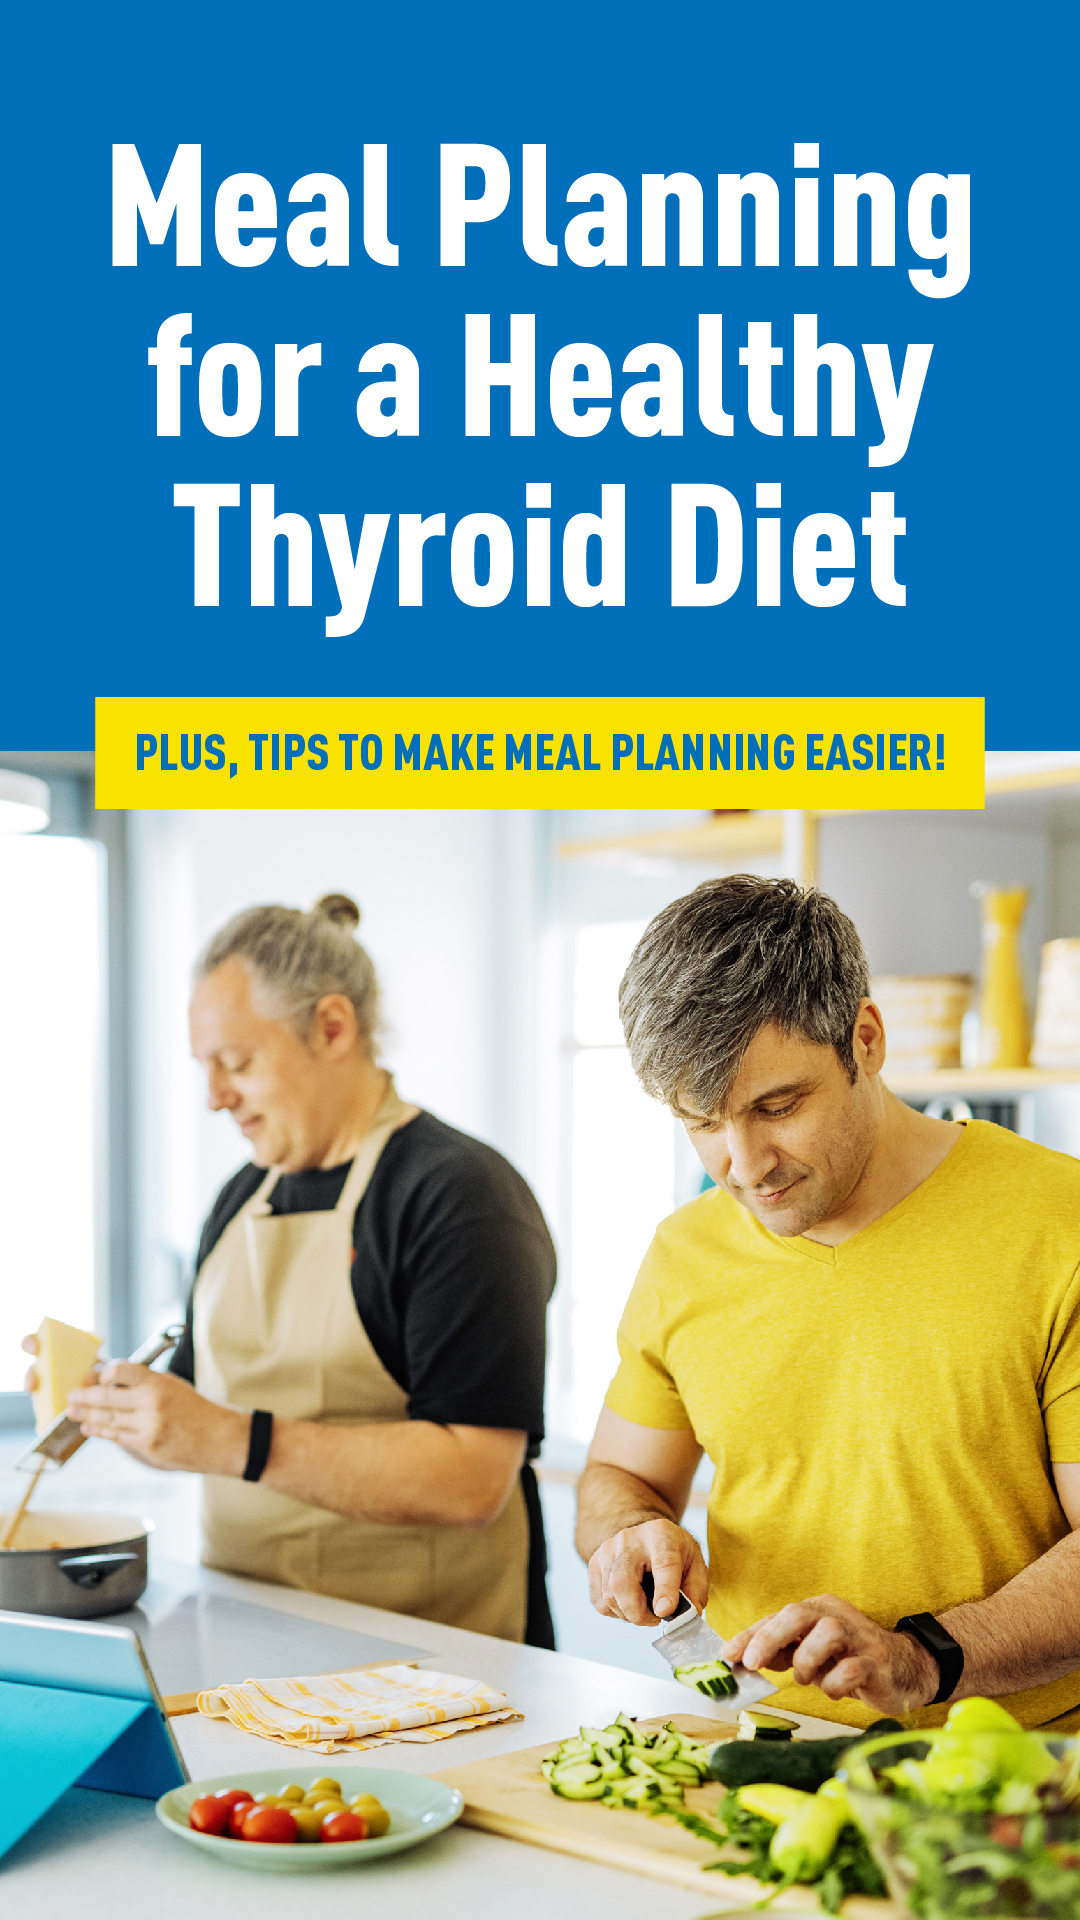 Meal Planning for a Healthy Thyroid Diet